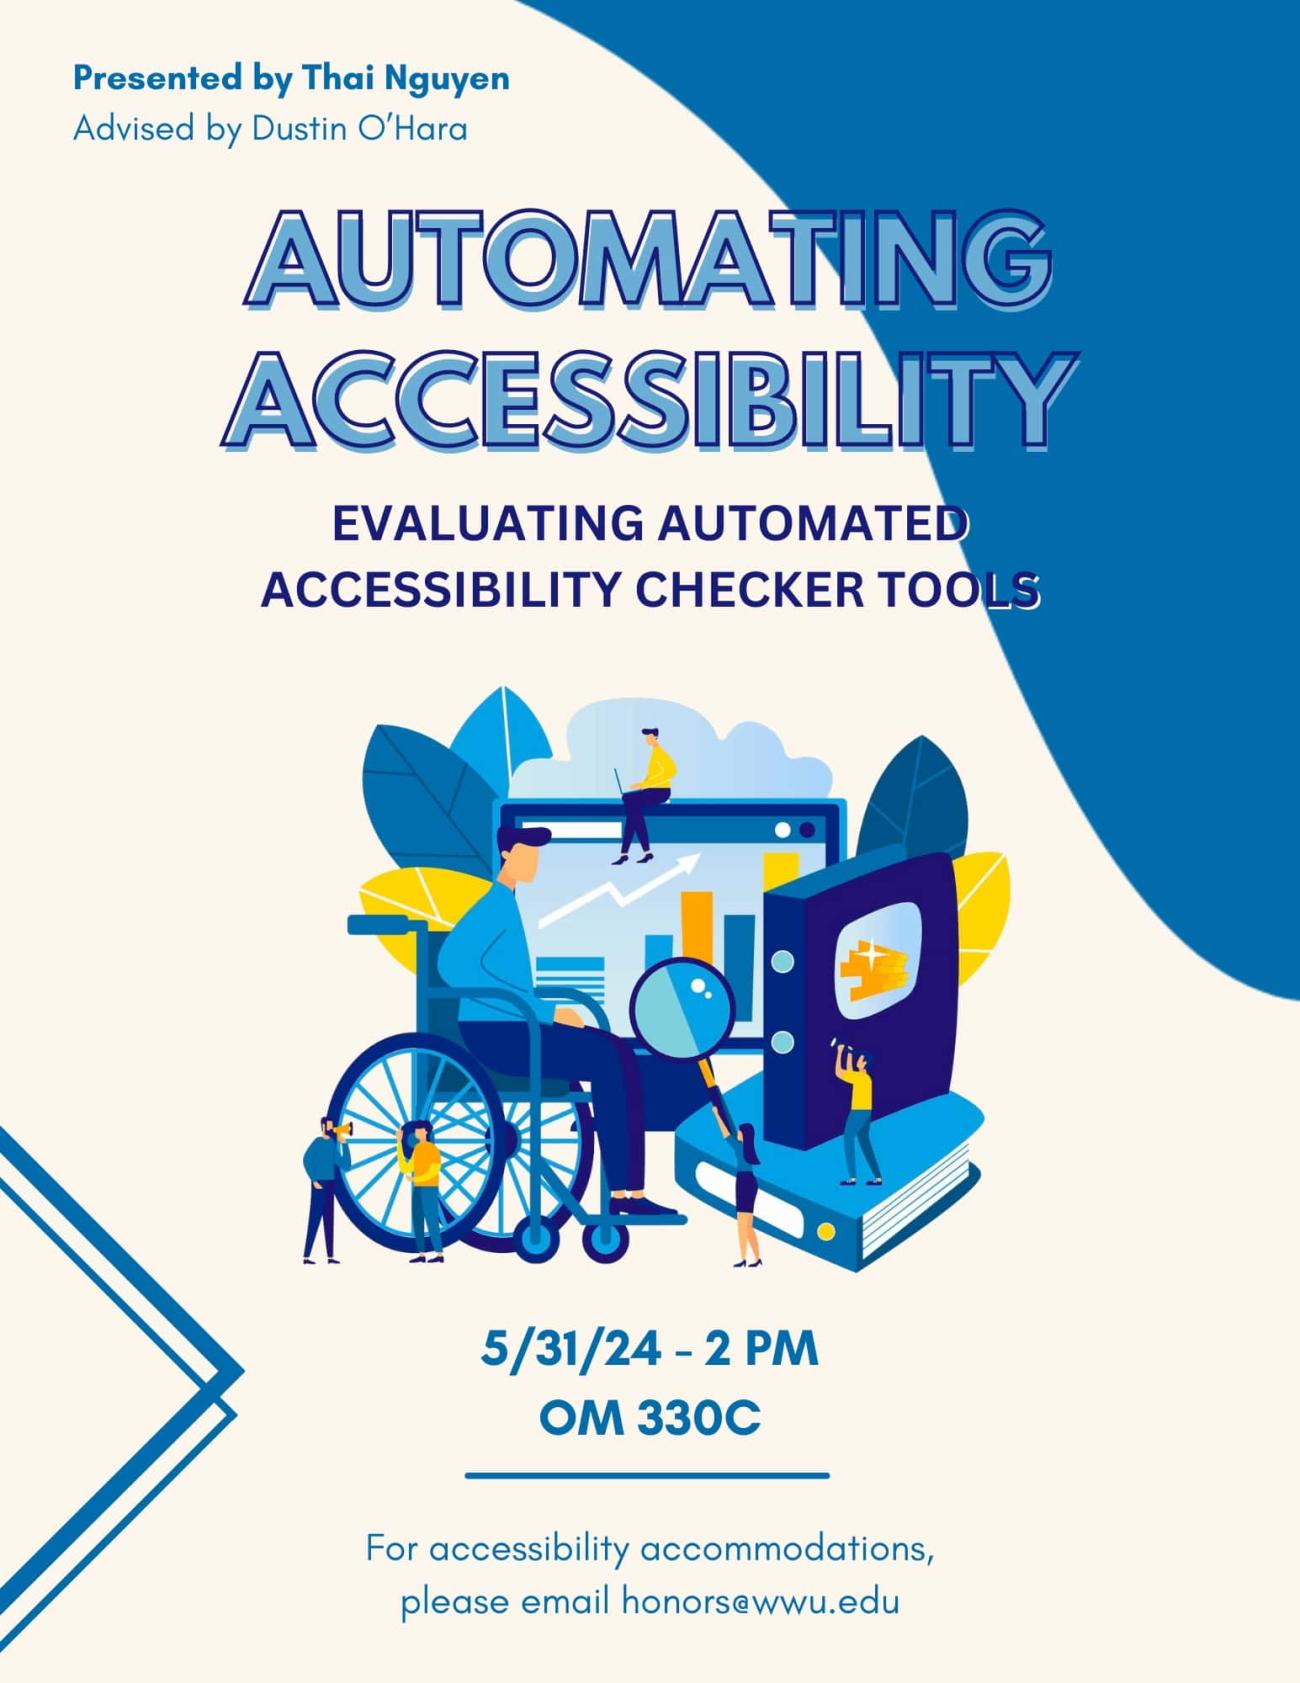 The poster has a blue background with a lighter blue curved shape at the top right corner. In the middle, there is an illustration of a person in a wheelchair being pushed by another person. The wheelchair is next to a large computer monitor with a magnifying glass on the screen. Two people stand on either side of the computer monitor. Text reads "Automating Accessibility: Evaluating Automated Accessibility Checker Tools. 5/31/24 - 2 PM, OM 330C. For accessibility accommodations, please email honors@wwu.edu